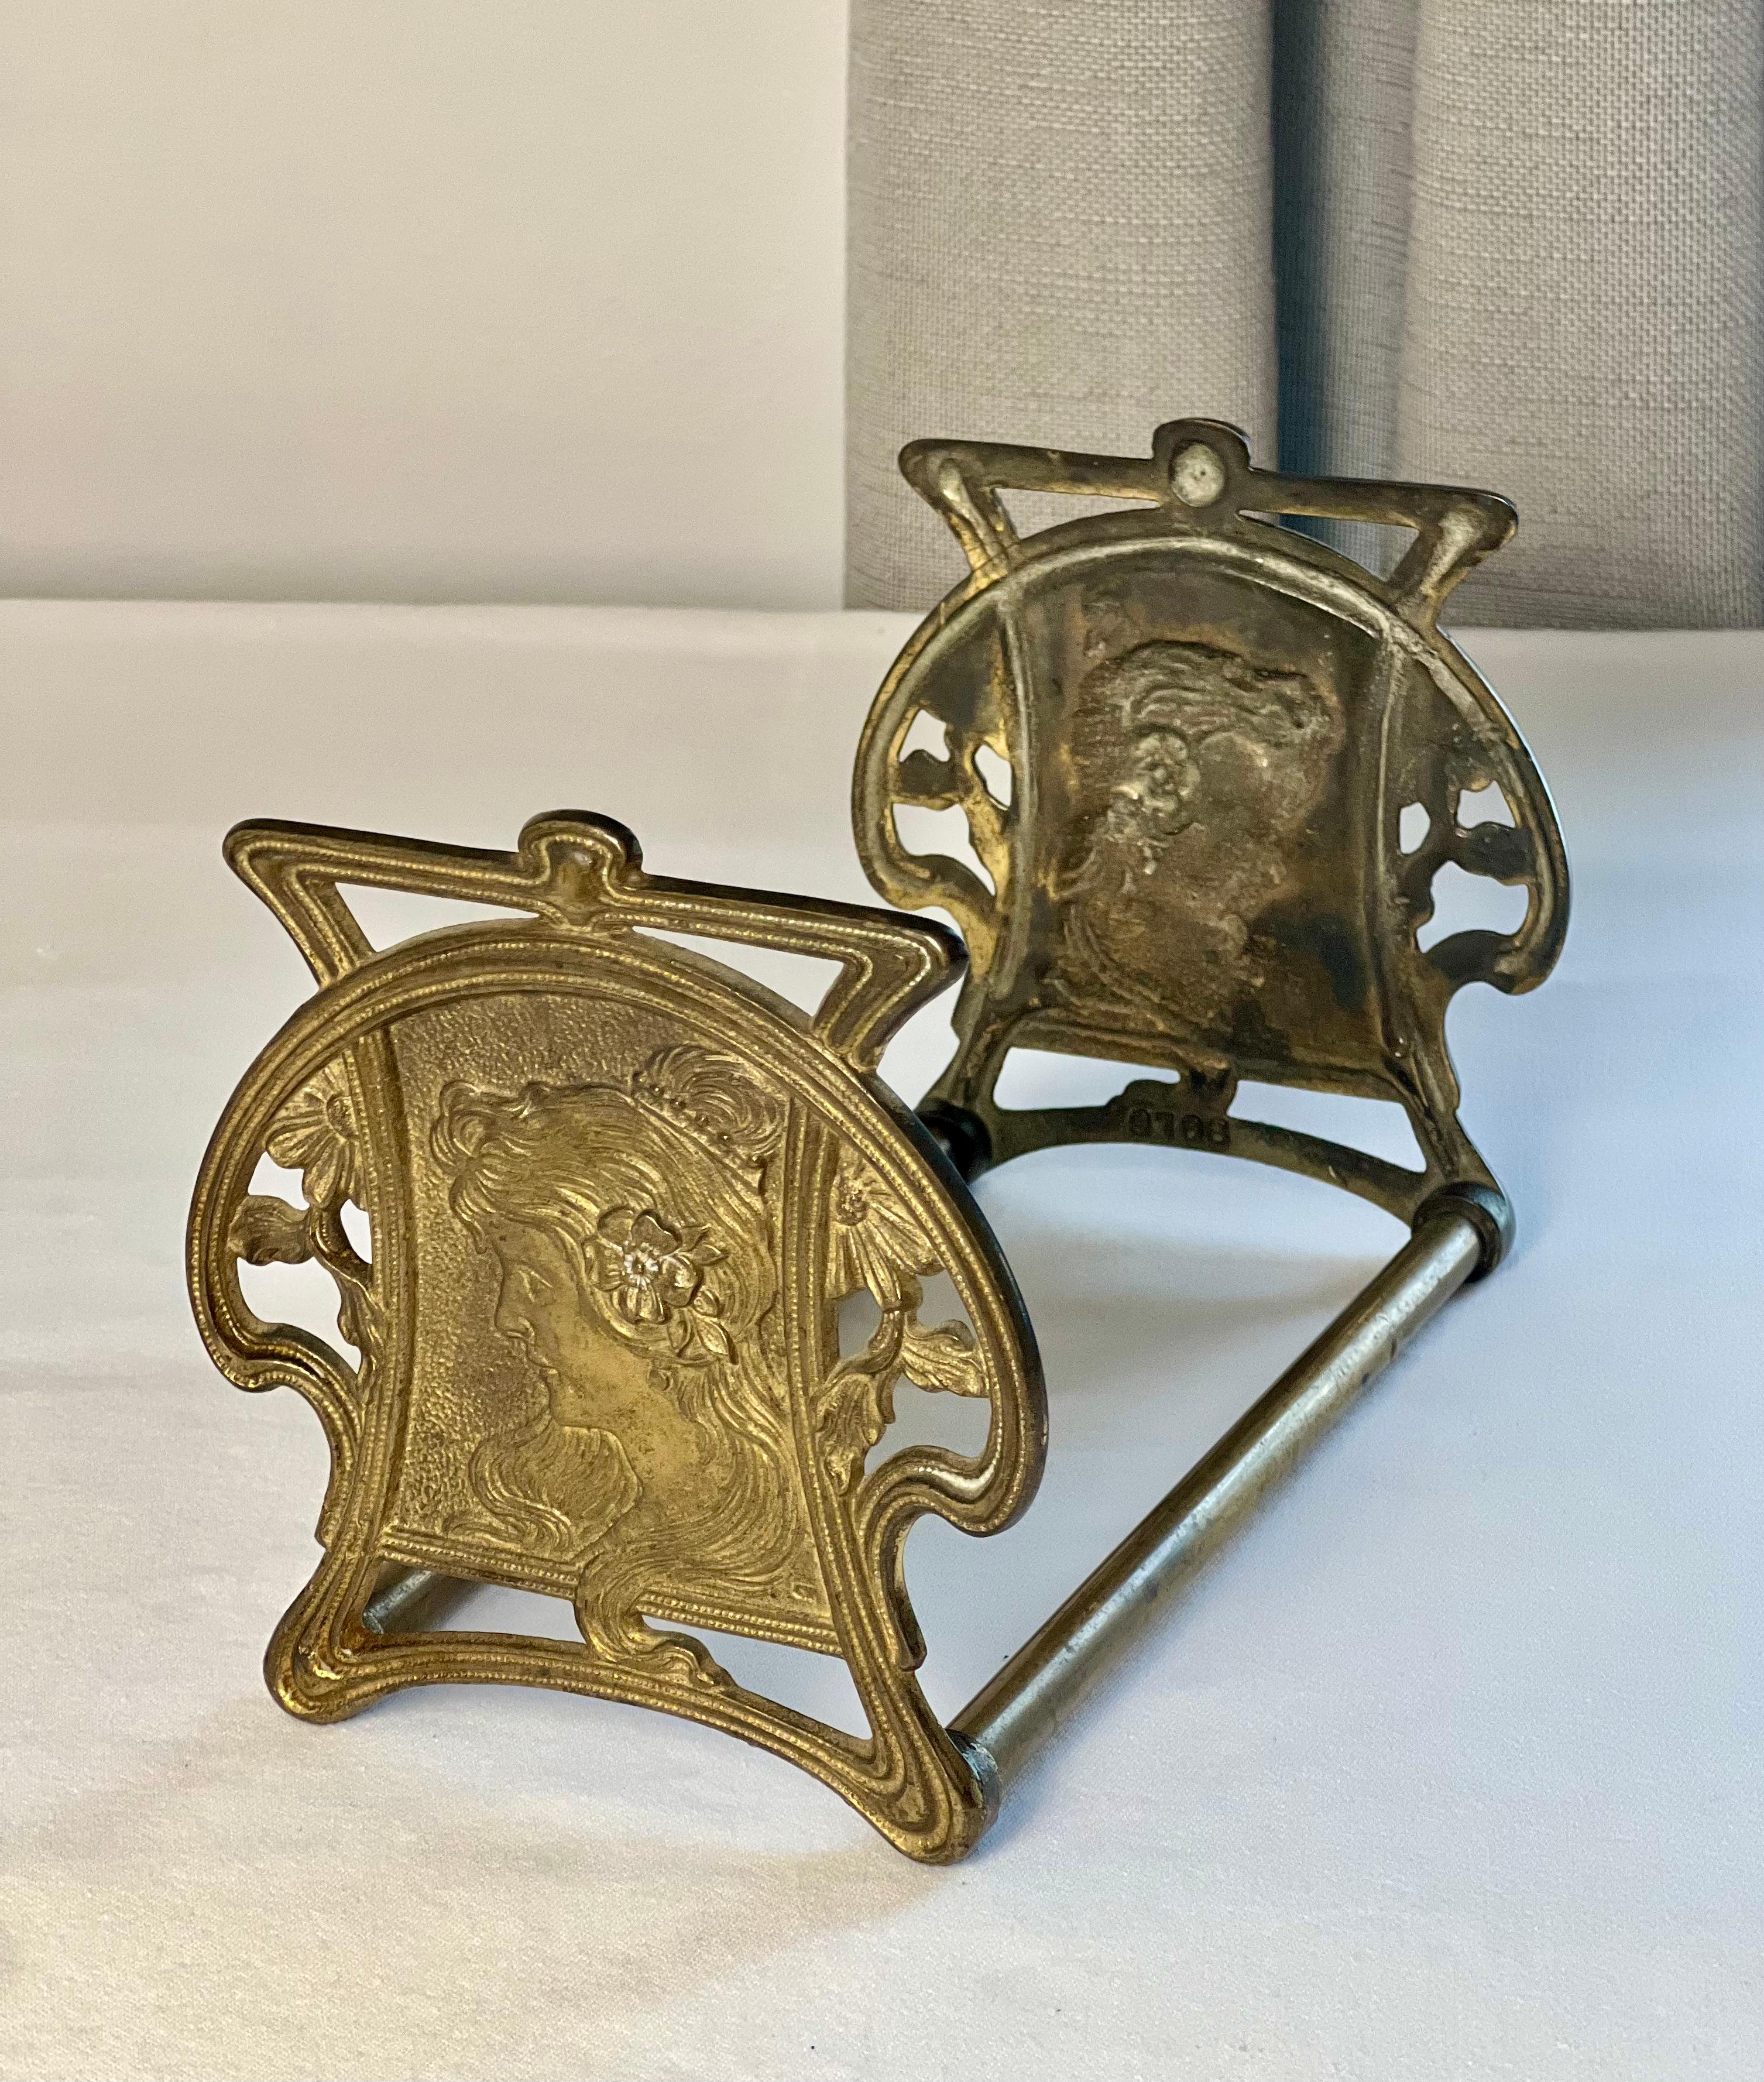 Art Nouveau bronzed cast iron and brass book stand attributed to the Judd Foundry, c. 1920s.

The stand portrays the profile of a pretty Mucha woman in relief with flowing hair and flowers on both ends. It smoothly slides to adjust from 8.5